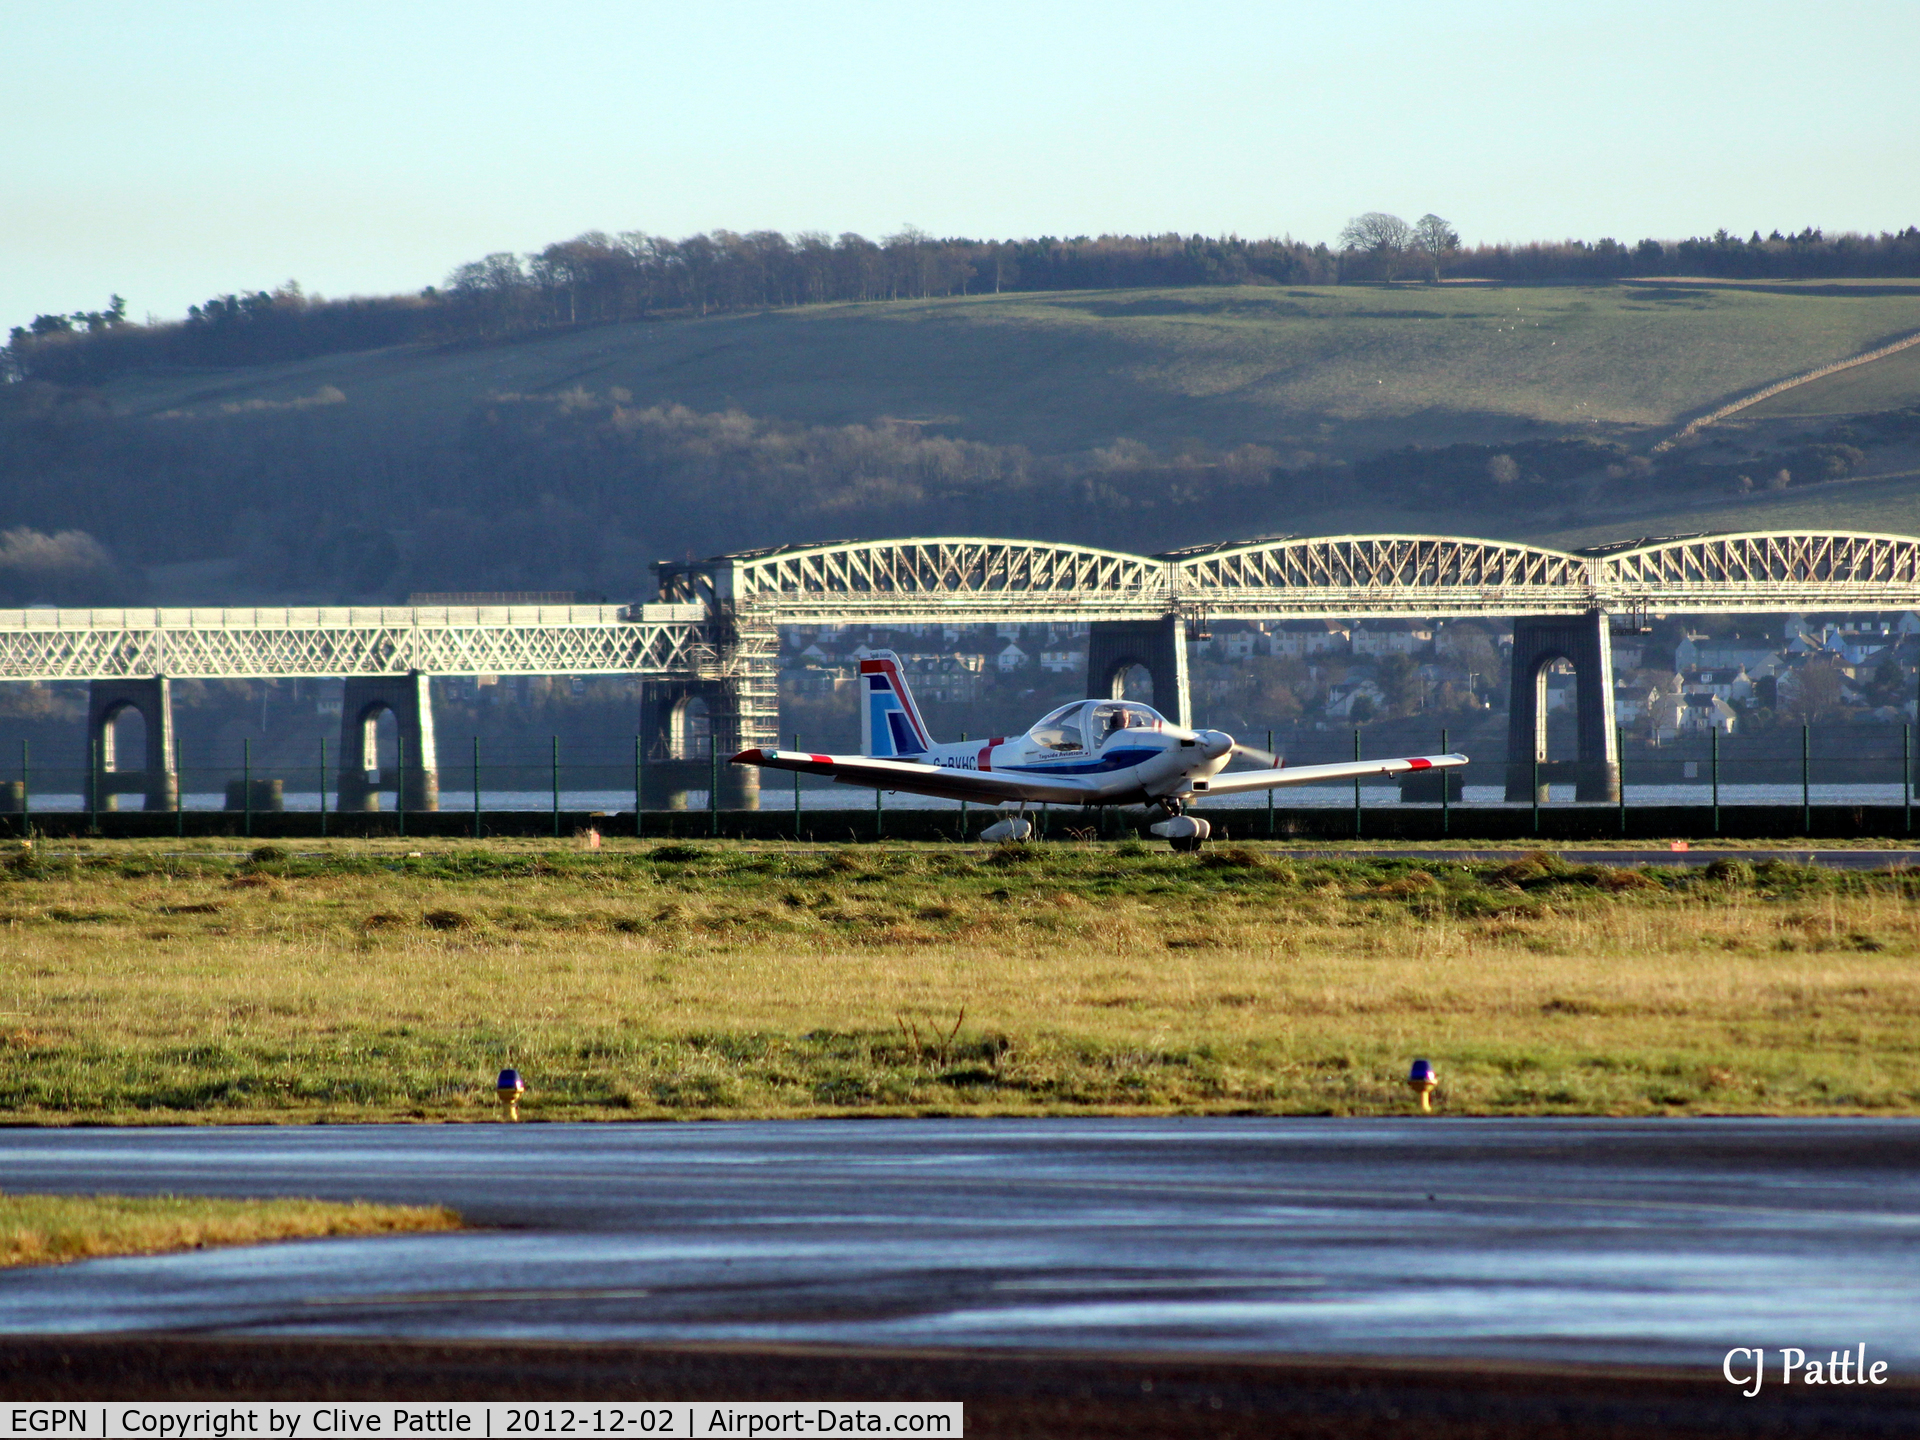 Dundee Airport, Dundee, Scotland United Kingdom (EGPN) - With a backdrop of the Tay Rail Bridge, a Grob Heron of the based Tayside Aviation prepares to take off.